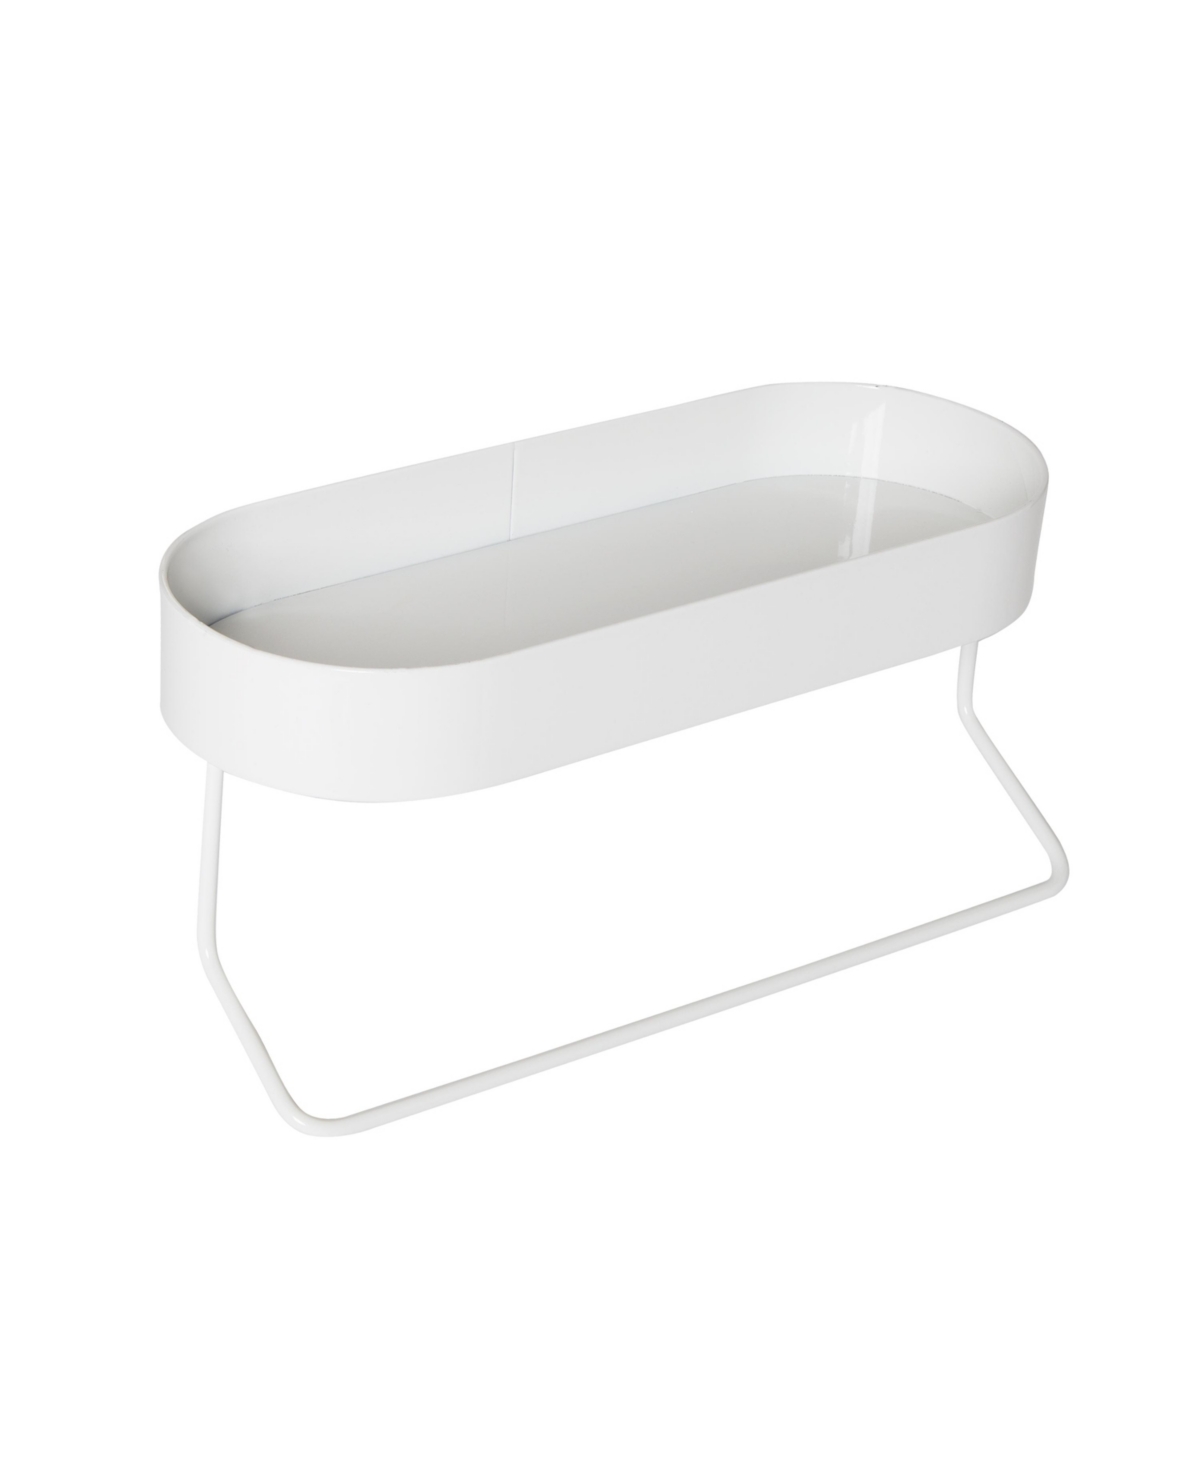 Honey Can Do Towel Bar And Oval Top Tray With Wall Mounted Bathroom Shelf In White